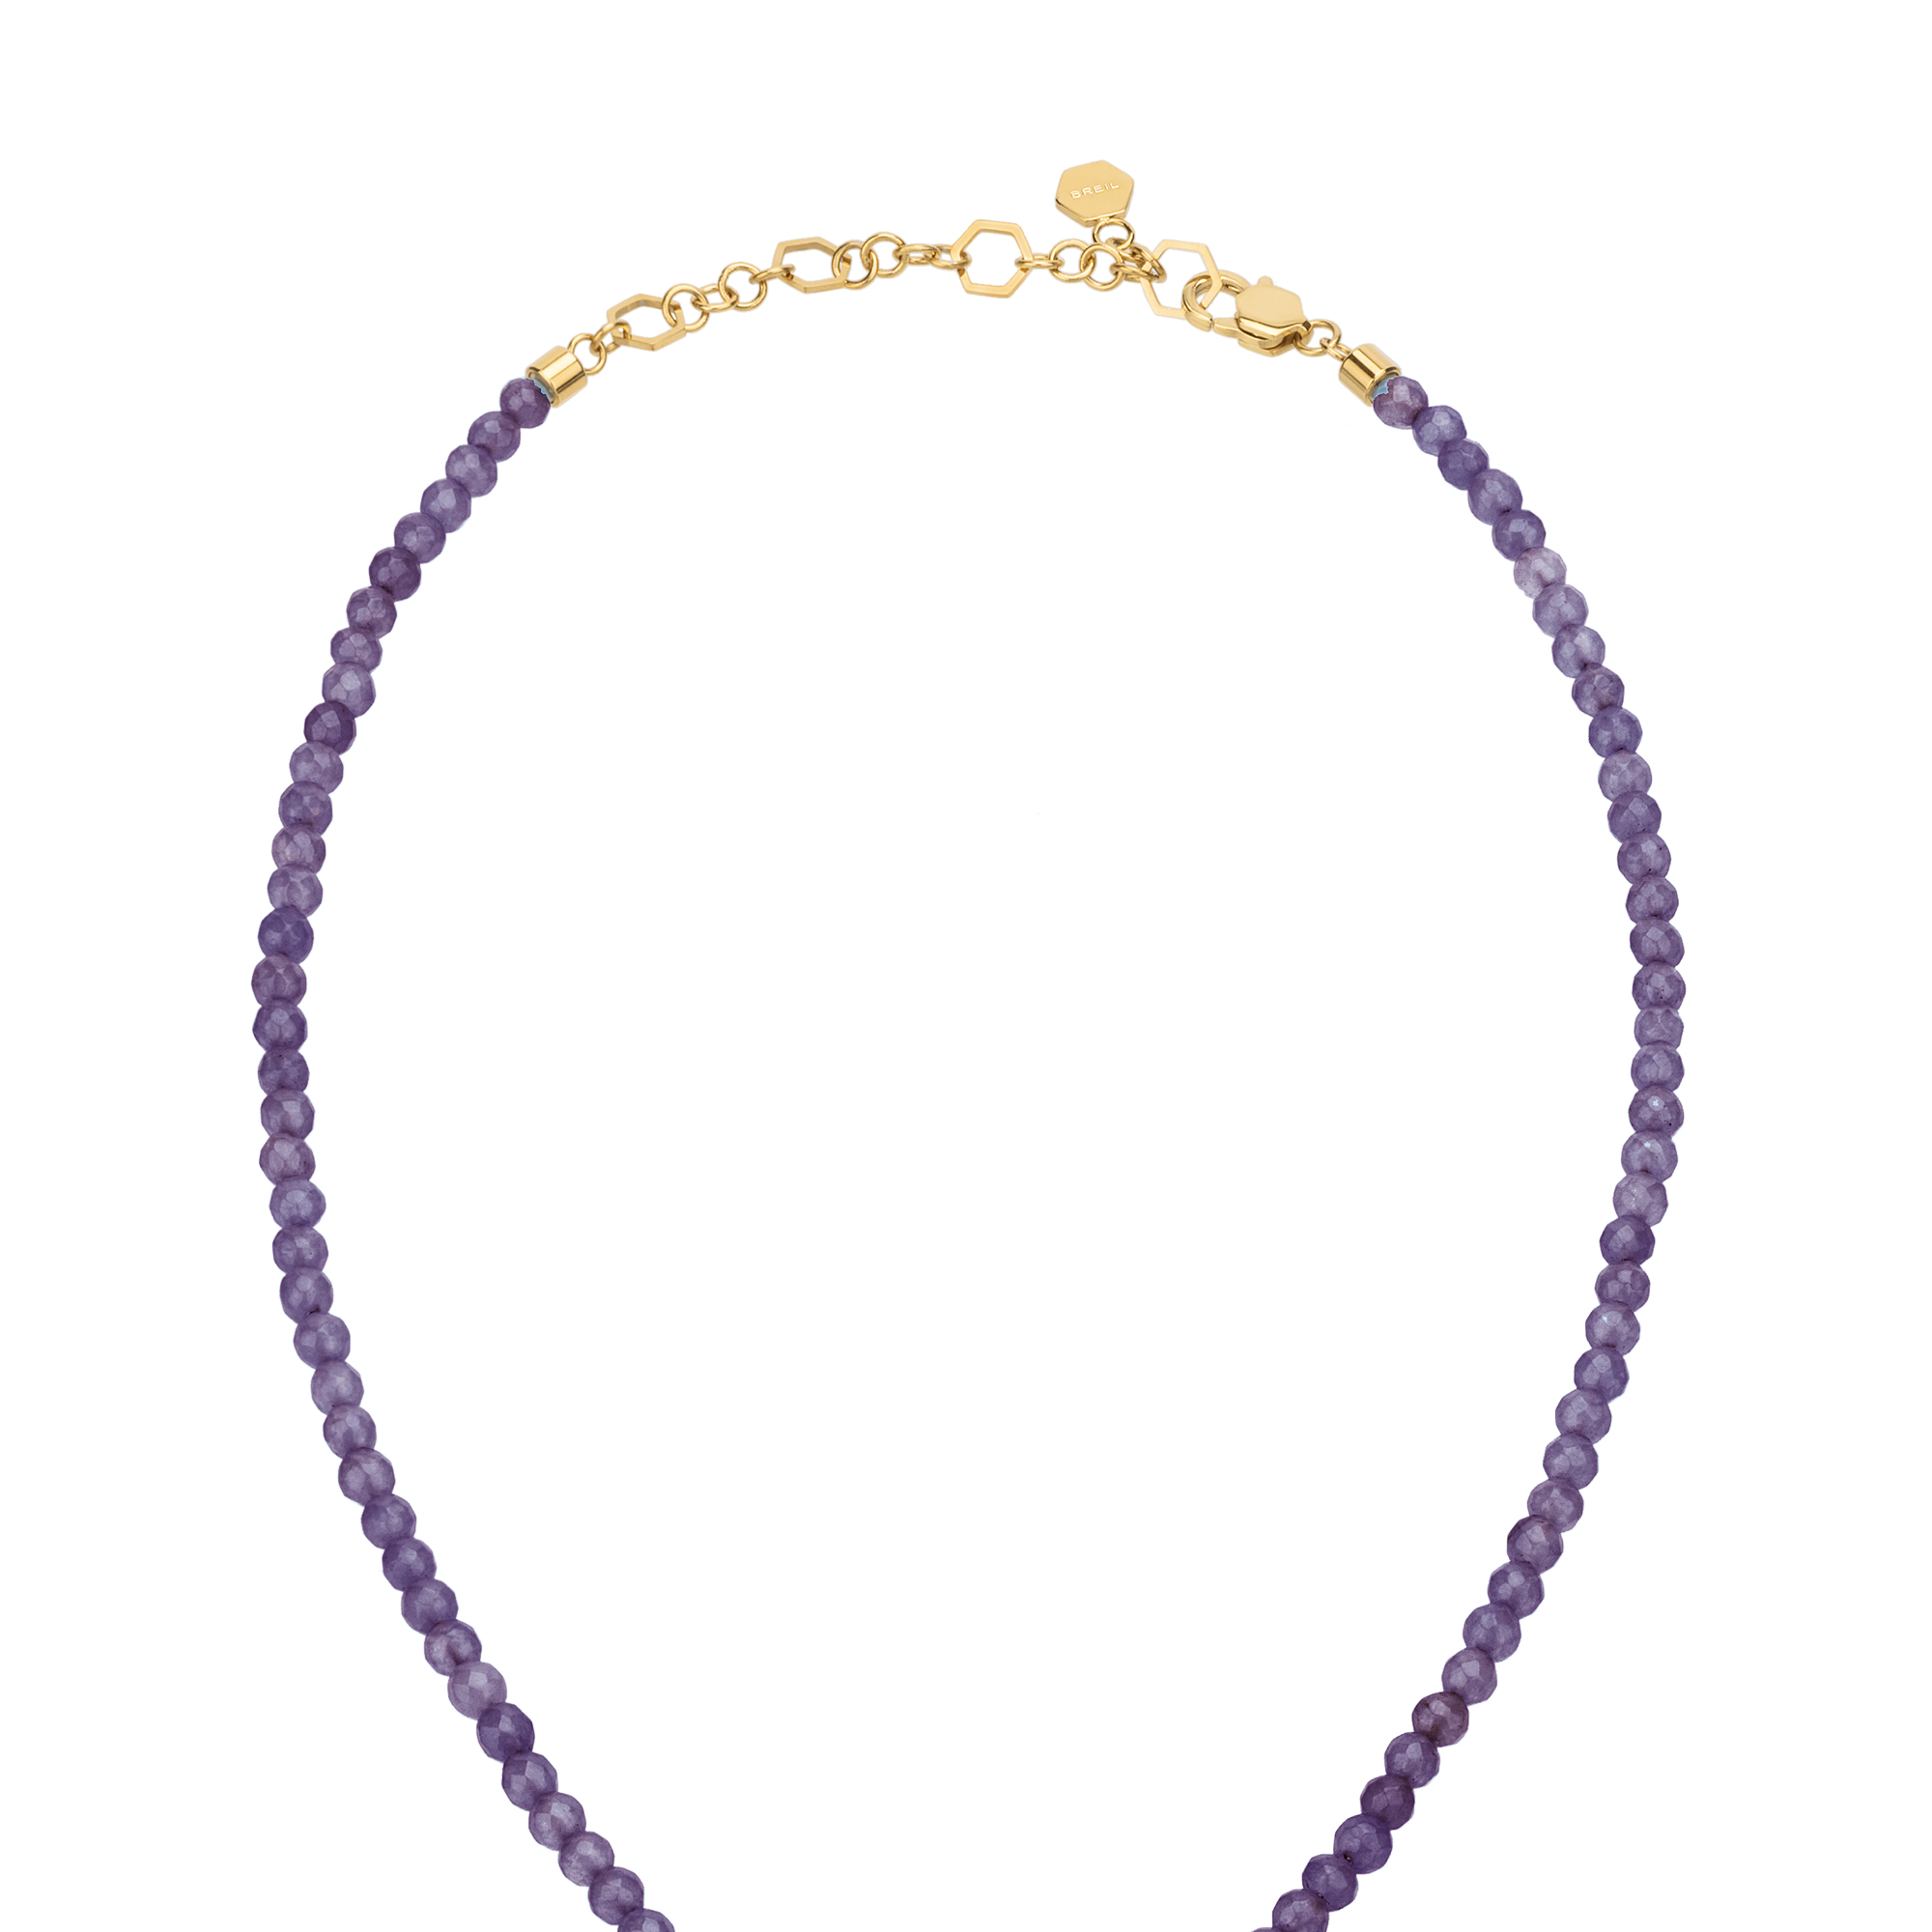 PRIVATE CODE - AMETHYST NECKLACE WITH IP GOLD STEEL PENDANT - 3 - TJ3151 | Breil